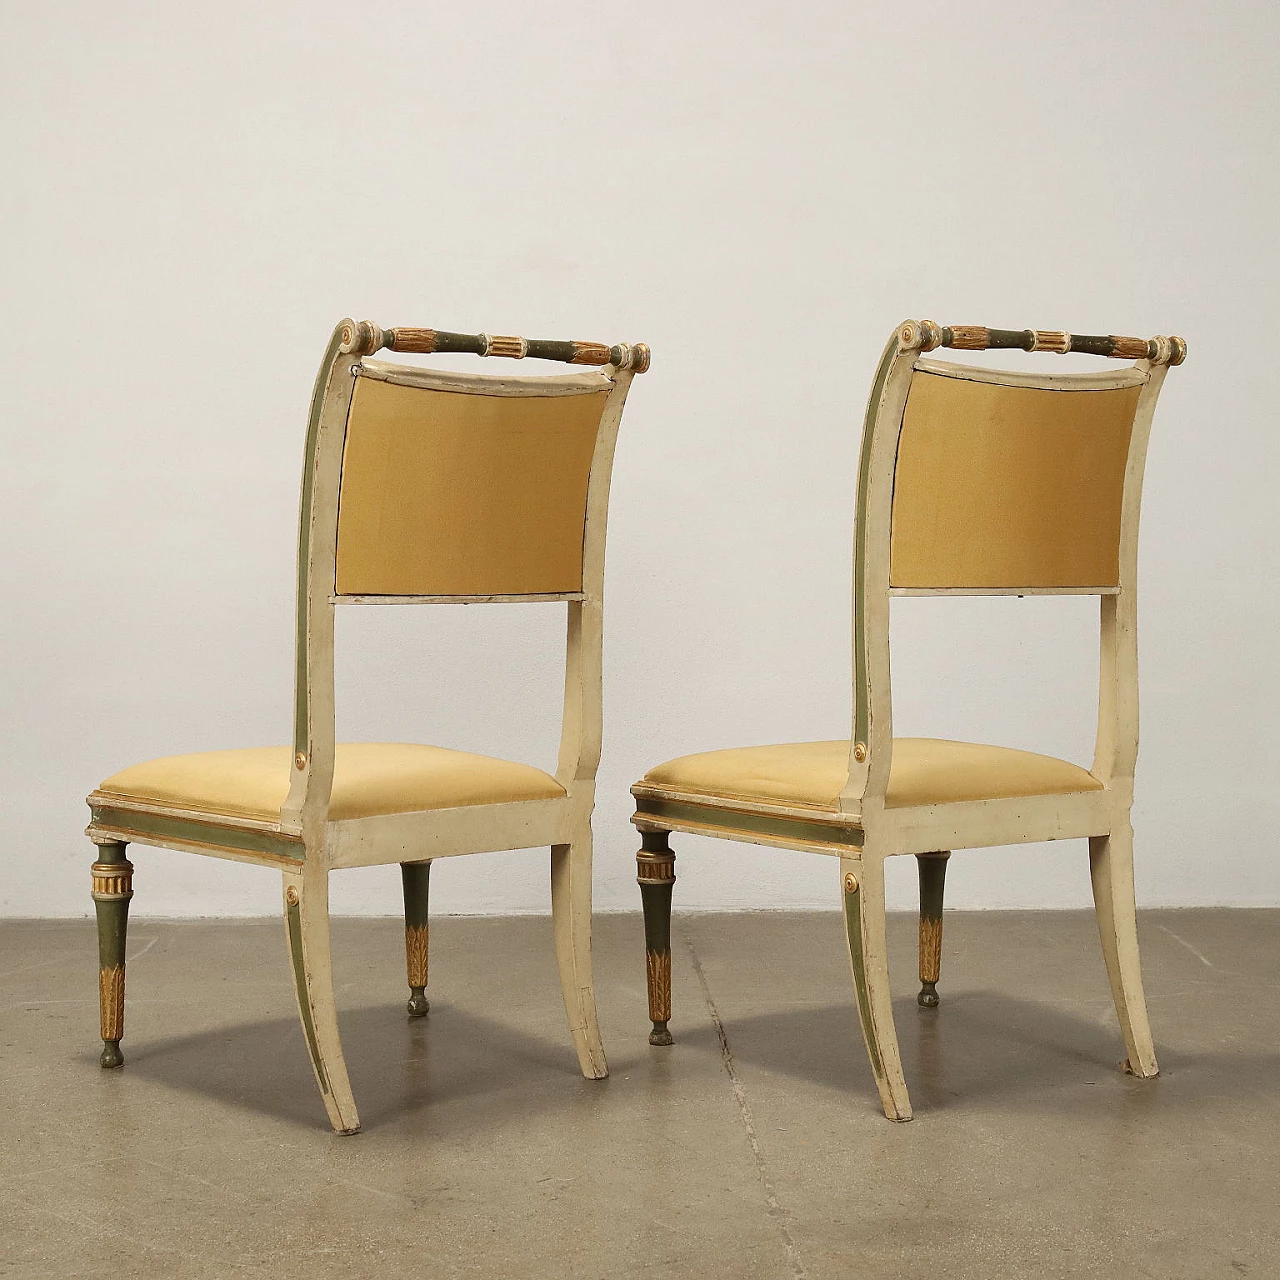 Pair of Empire chairs in lacquered and gilded wood, 19th century 10